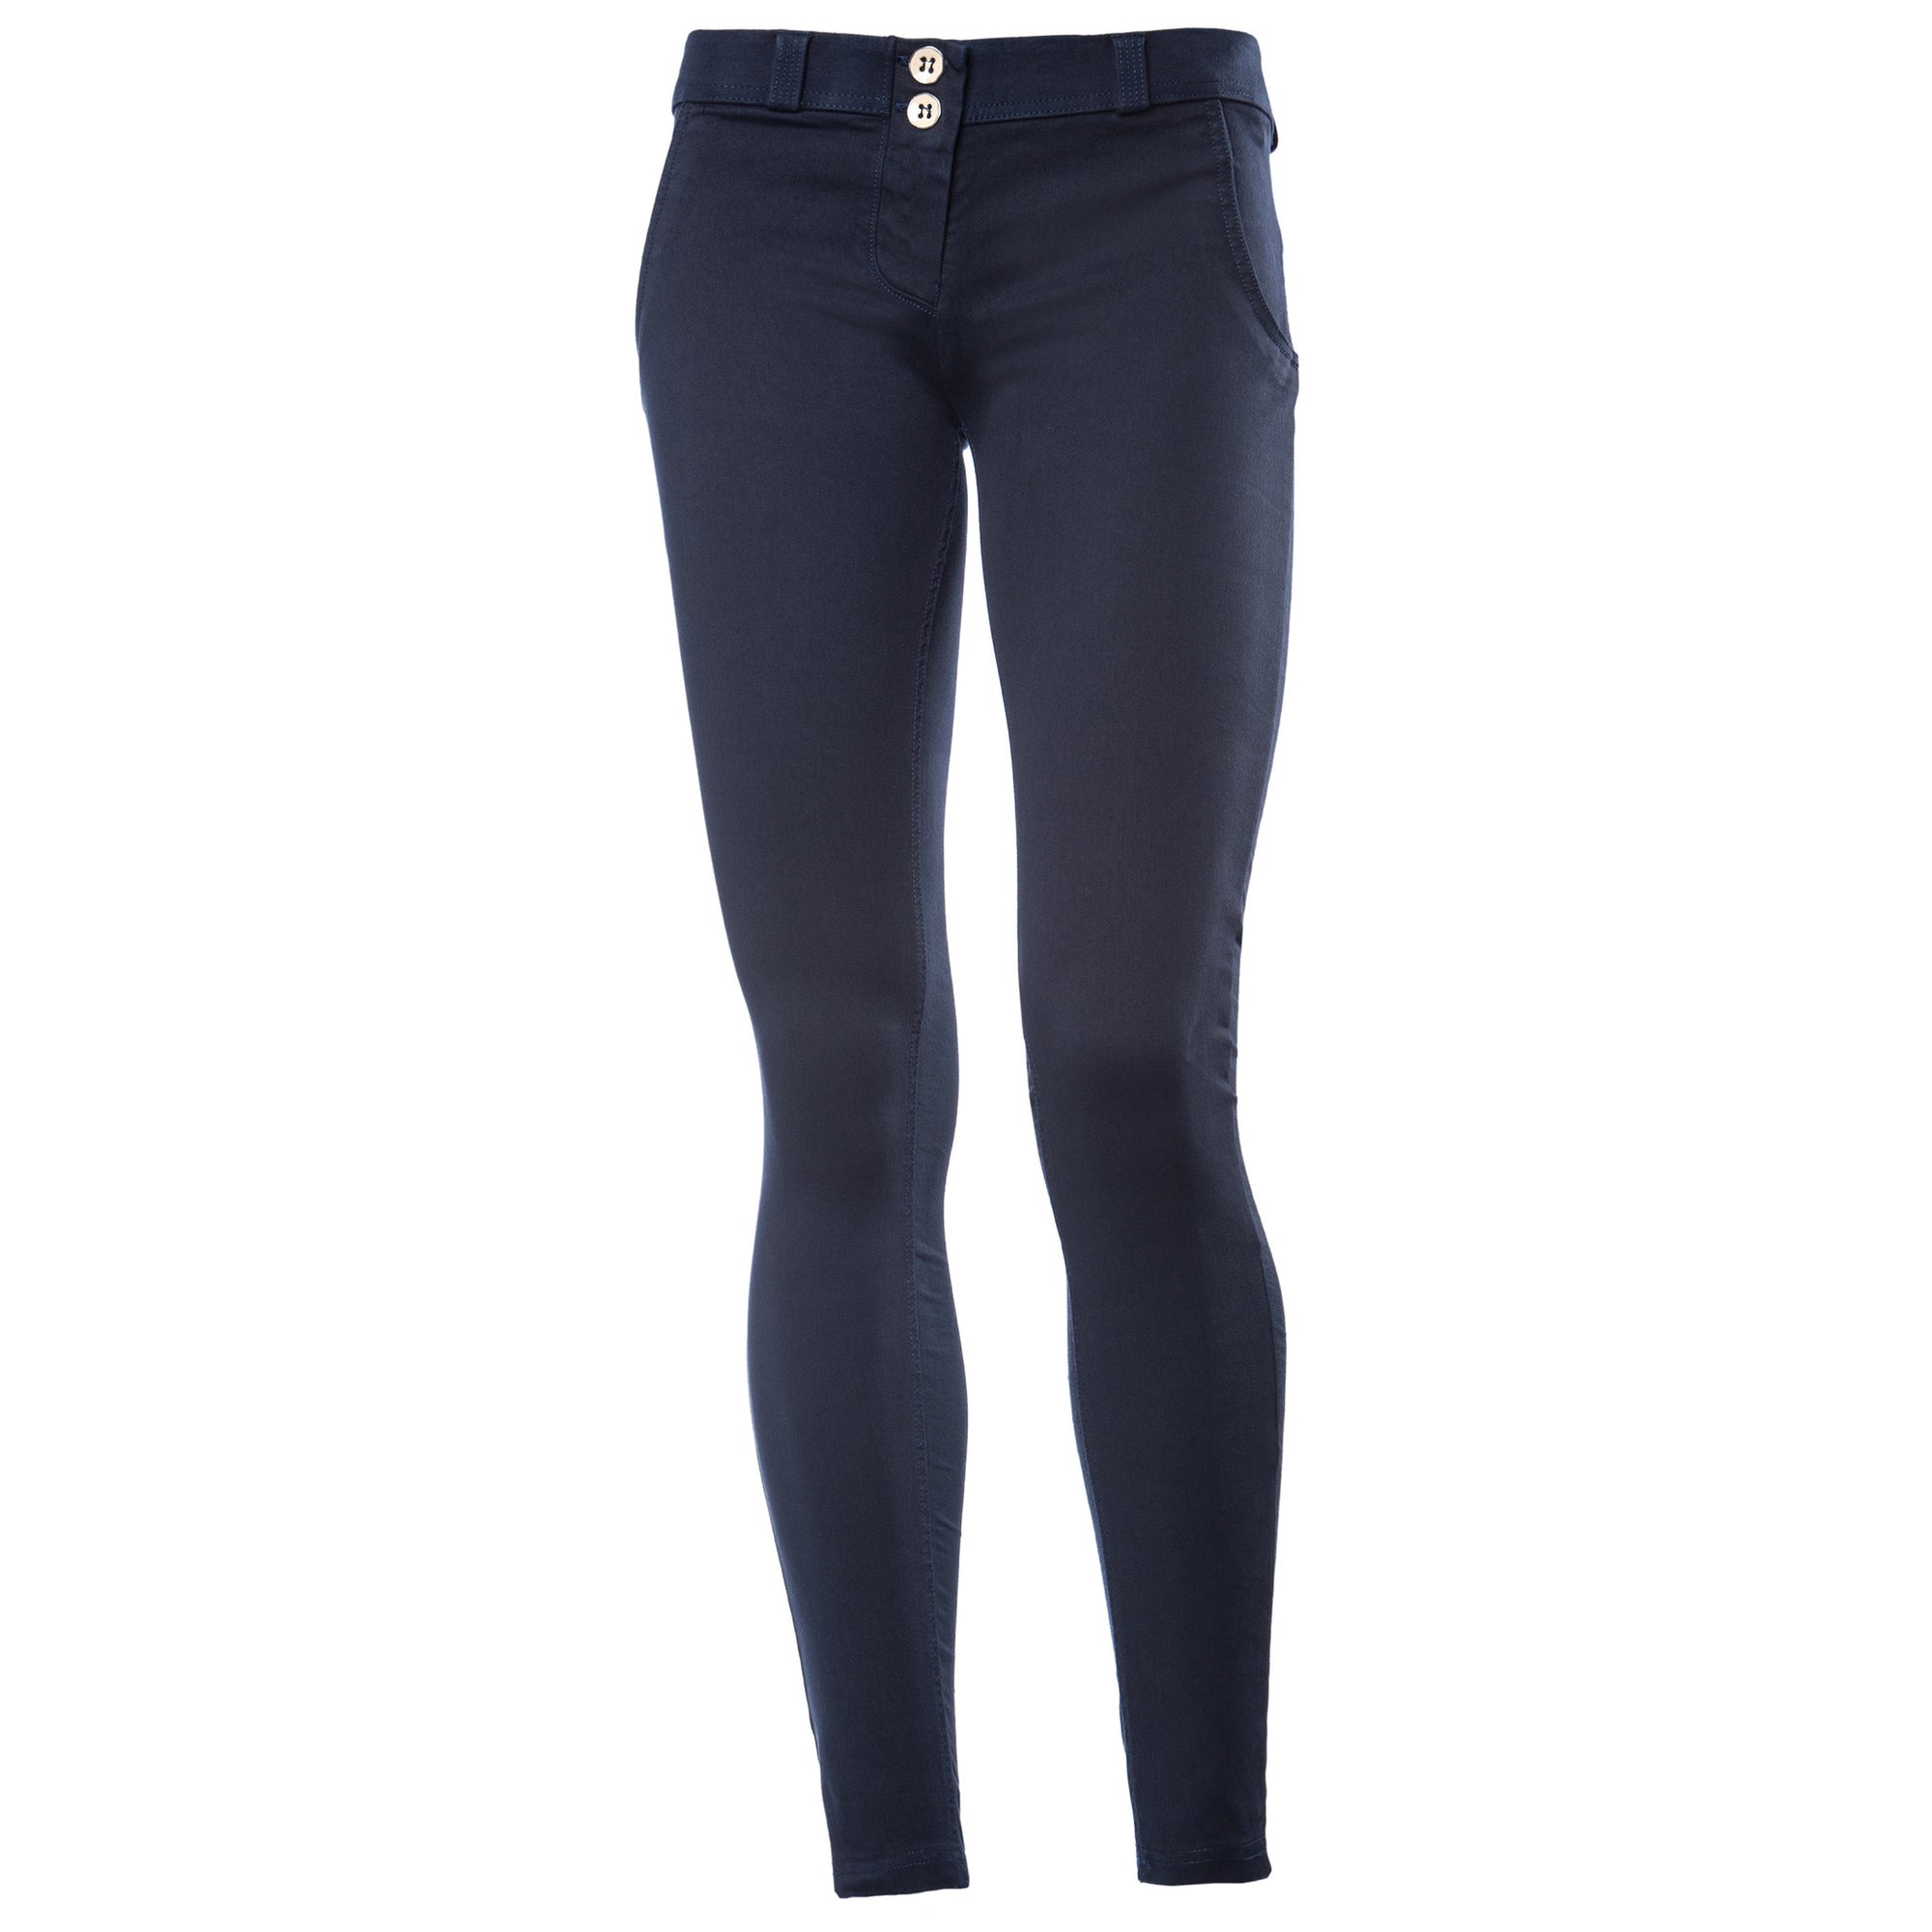 FREDDY TWILL FRONT WR.UP PANT - Navy - LIVIFY
 - 1